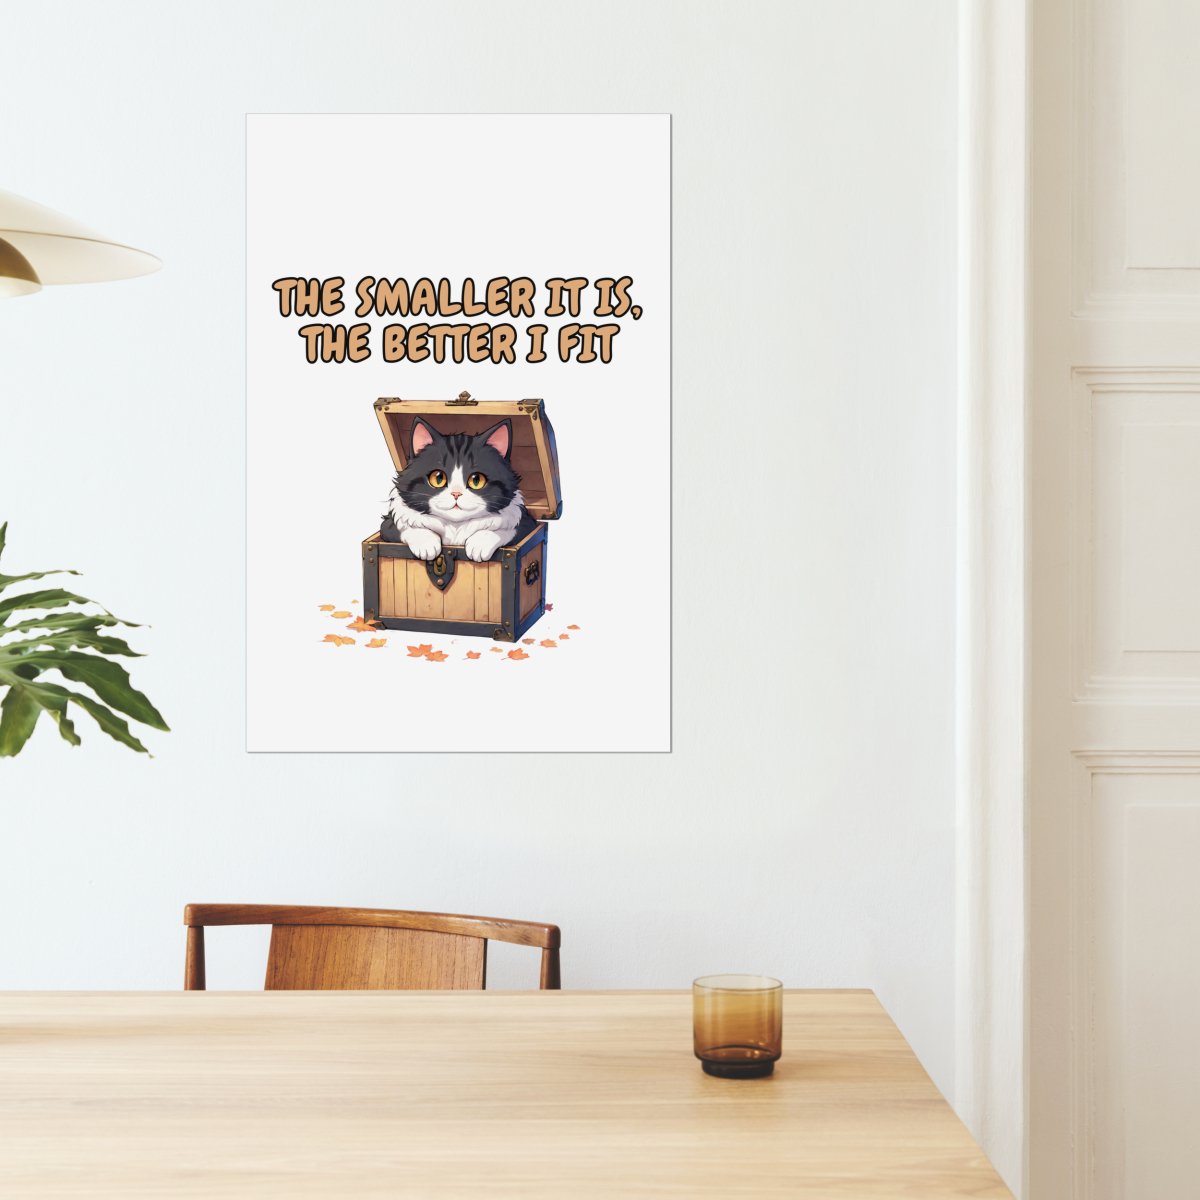 The smaller it is - Art print - Poster - Ever colorful